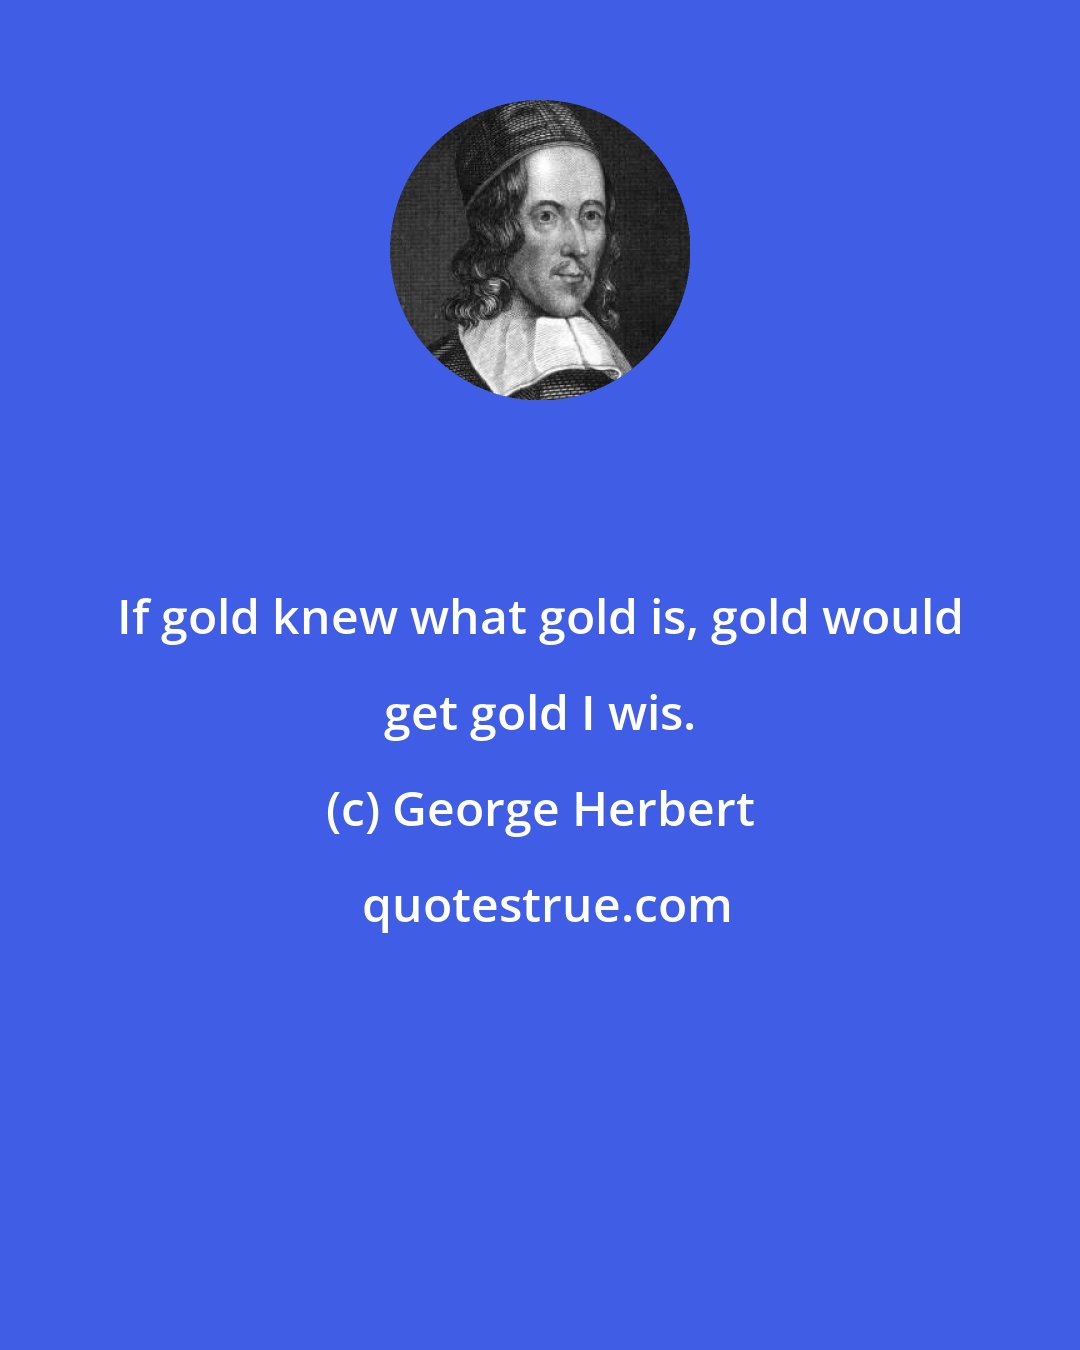 George Herbert: If gold knew what gold is, gold would get gold I wis.